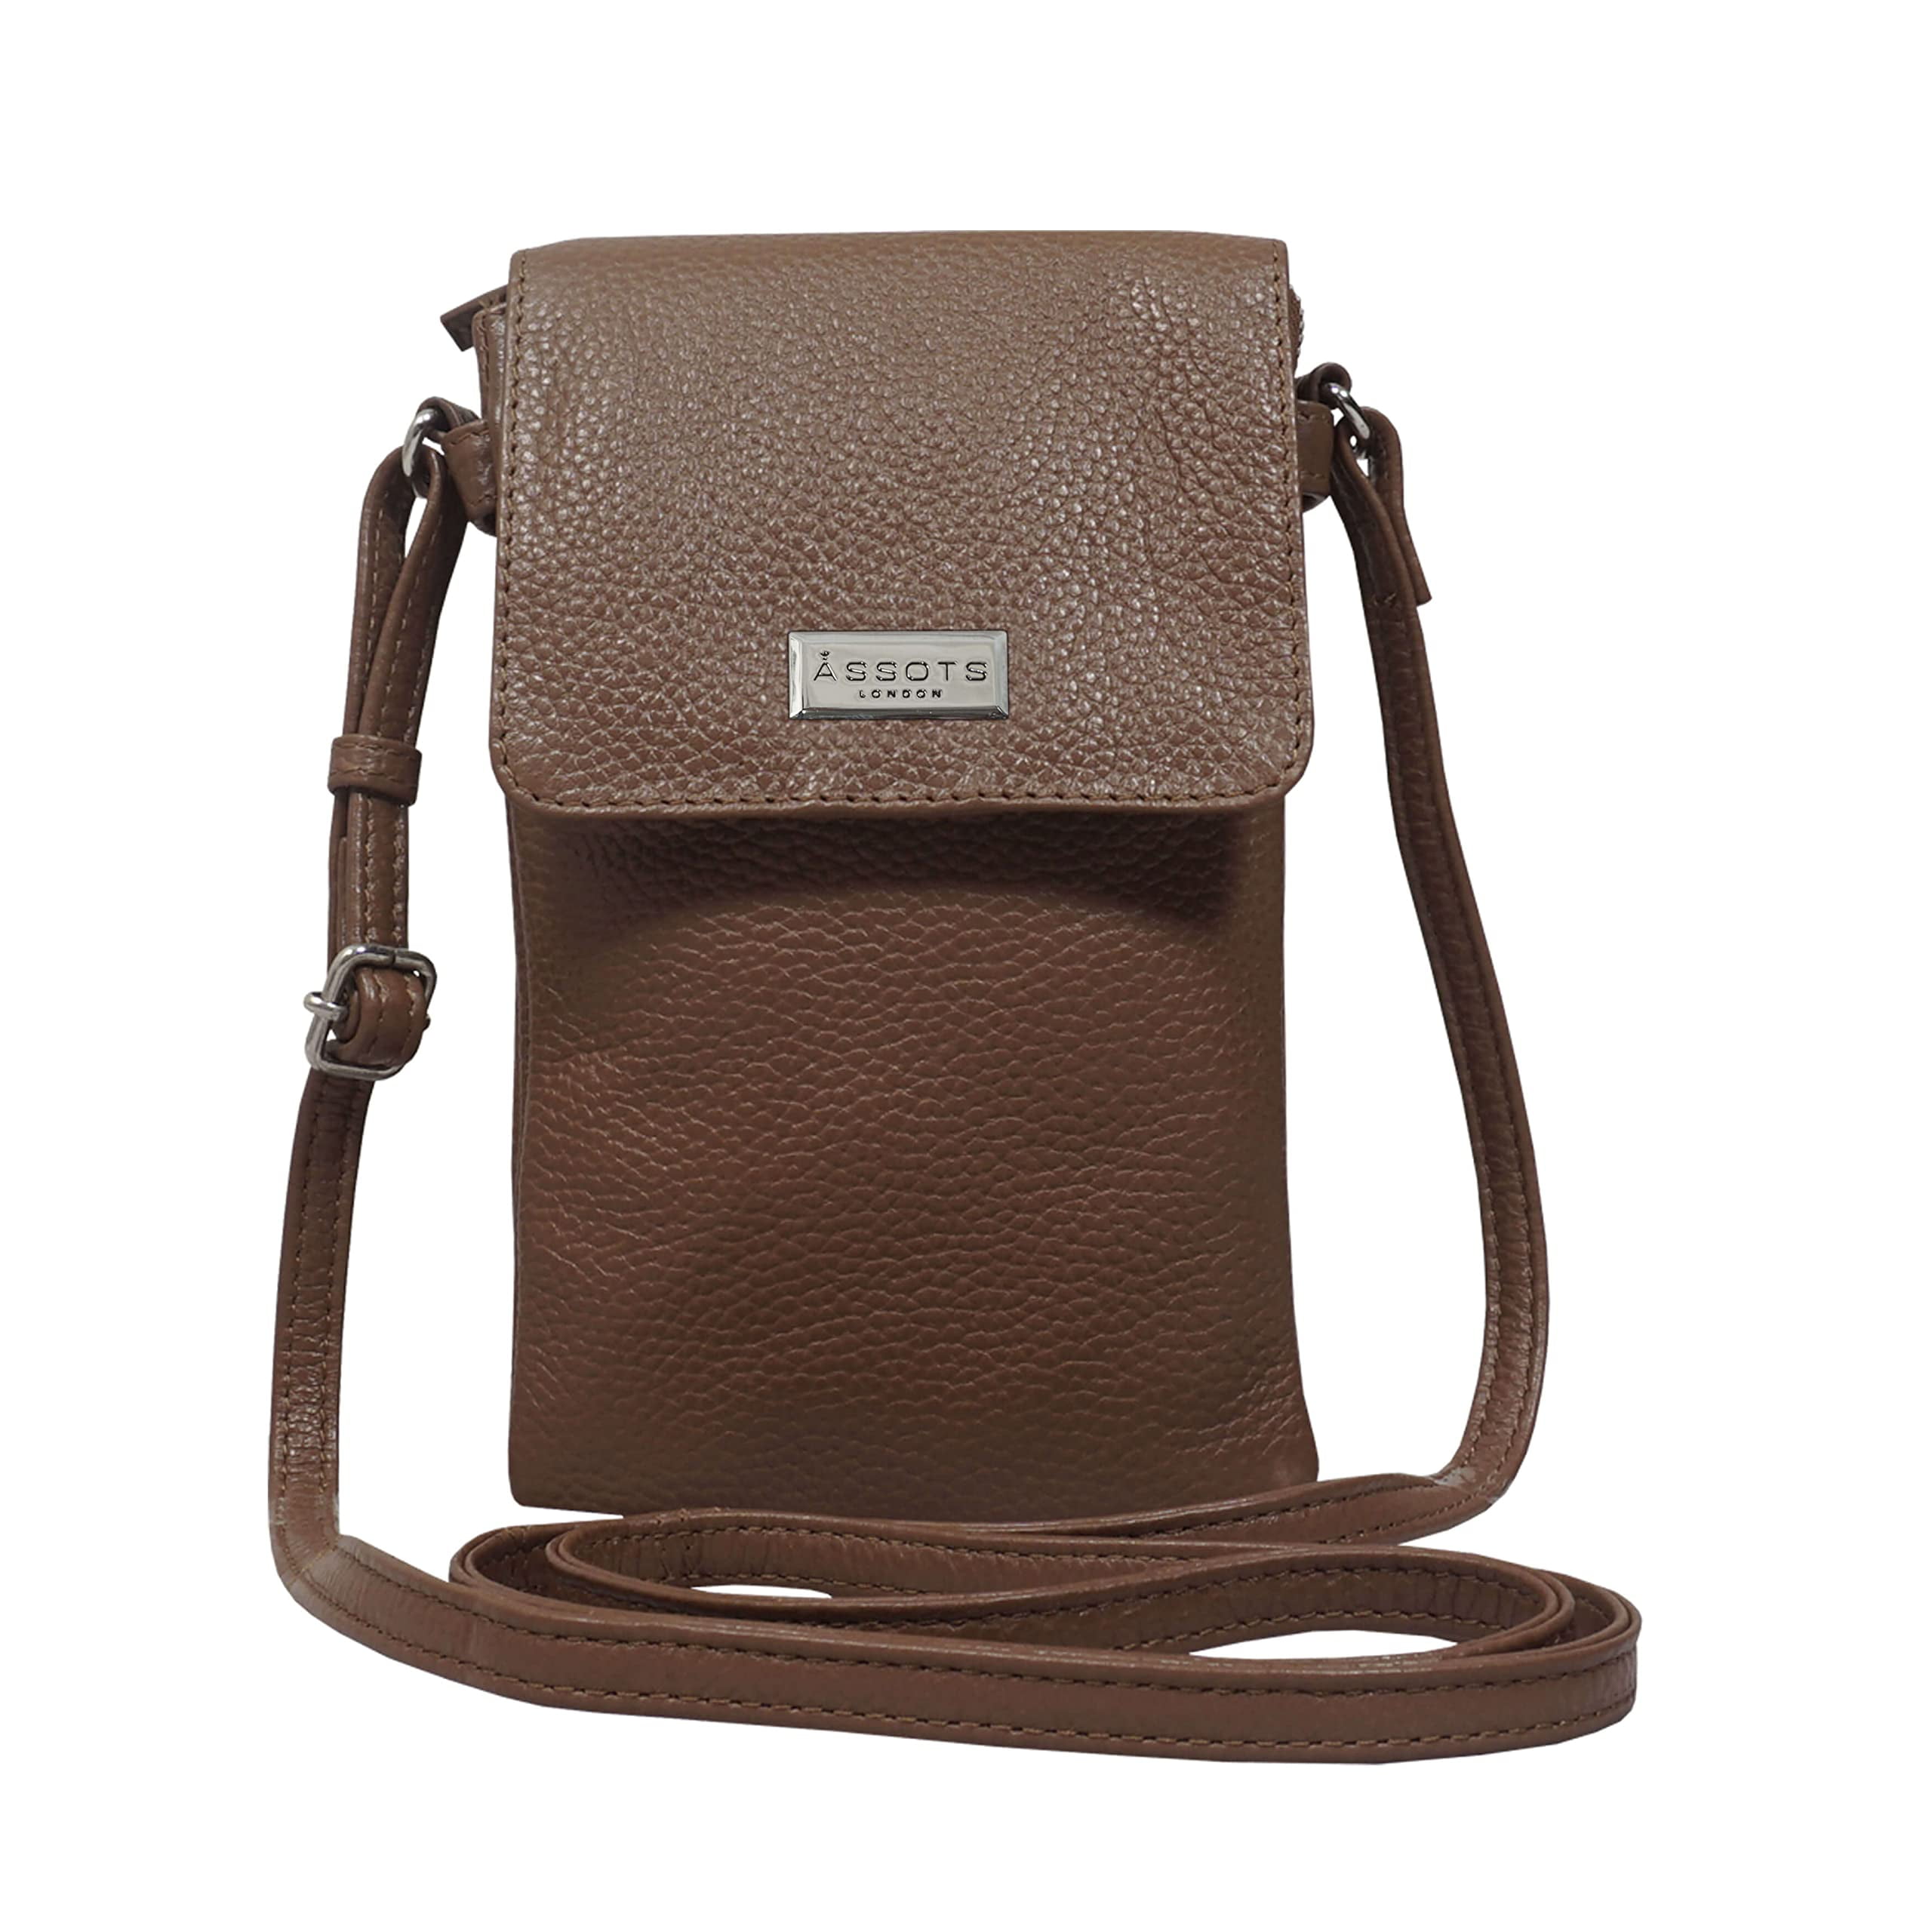 Brown Tan Leather Designer Crossbody Tote Bag With Fashionable Print Luxury  Handbag For Shoulder Or Wemix Wallet, Available In One Size From  Chain_bags, $34.2 | DHgate.Com